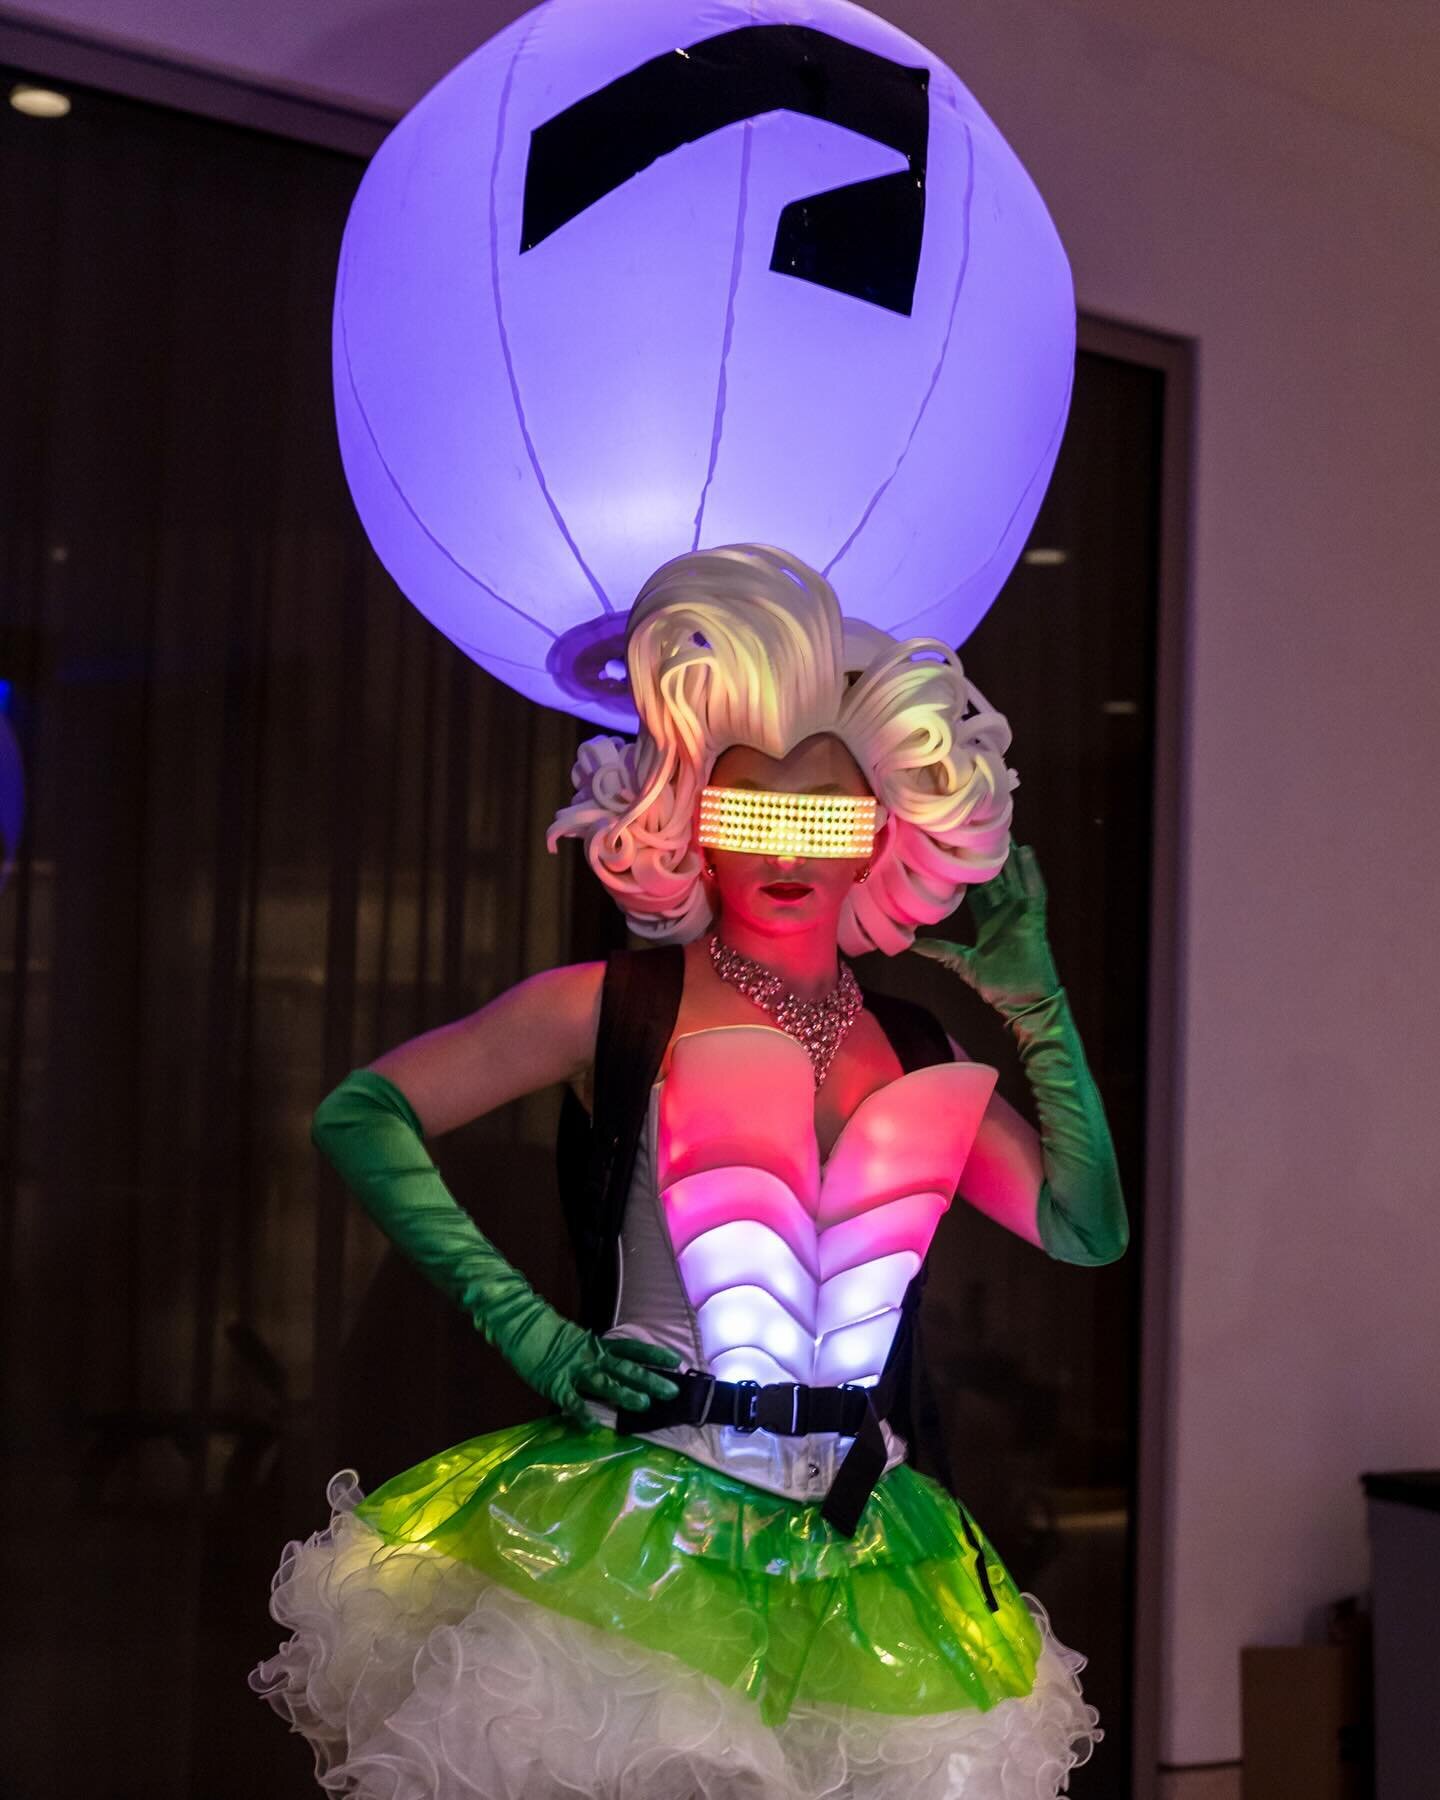 All your guests won&rsquo;t miss these LED galactic greeters as they stroll around your party. The giant inner-lit balloon allows for clear visual of your branding! 🎈